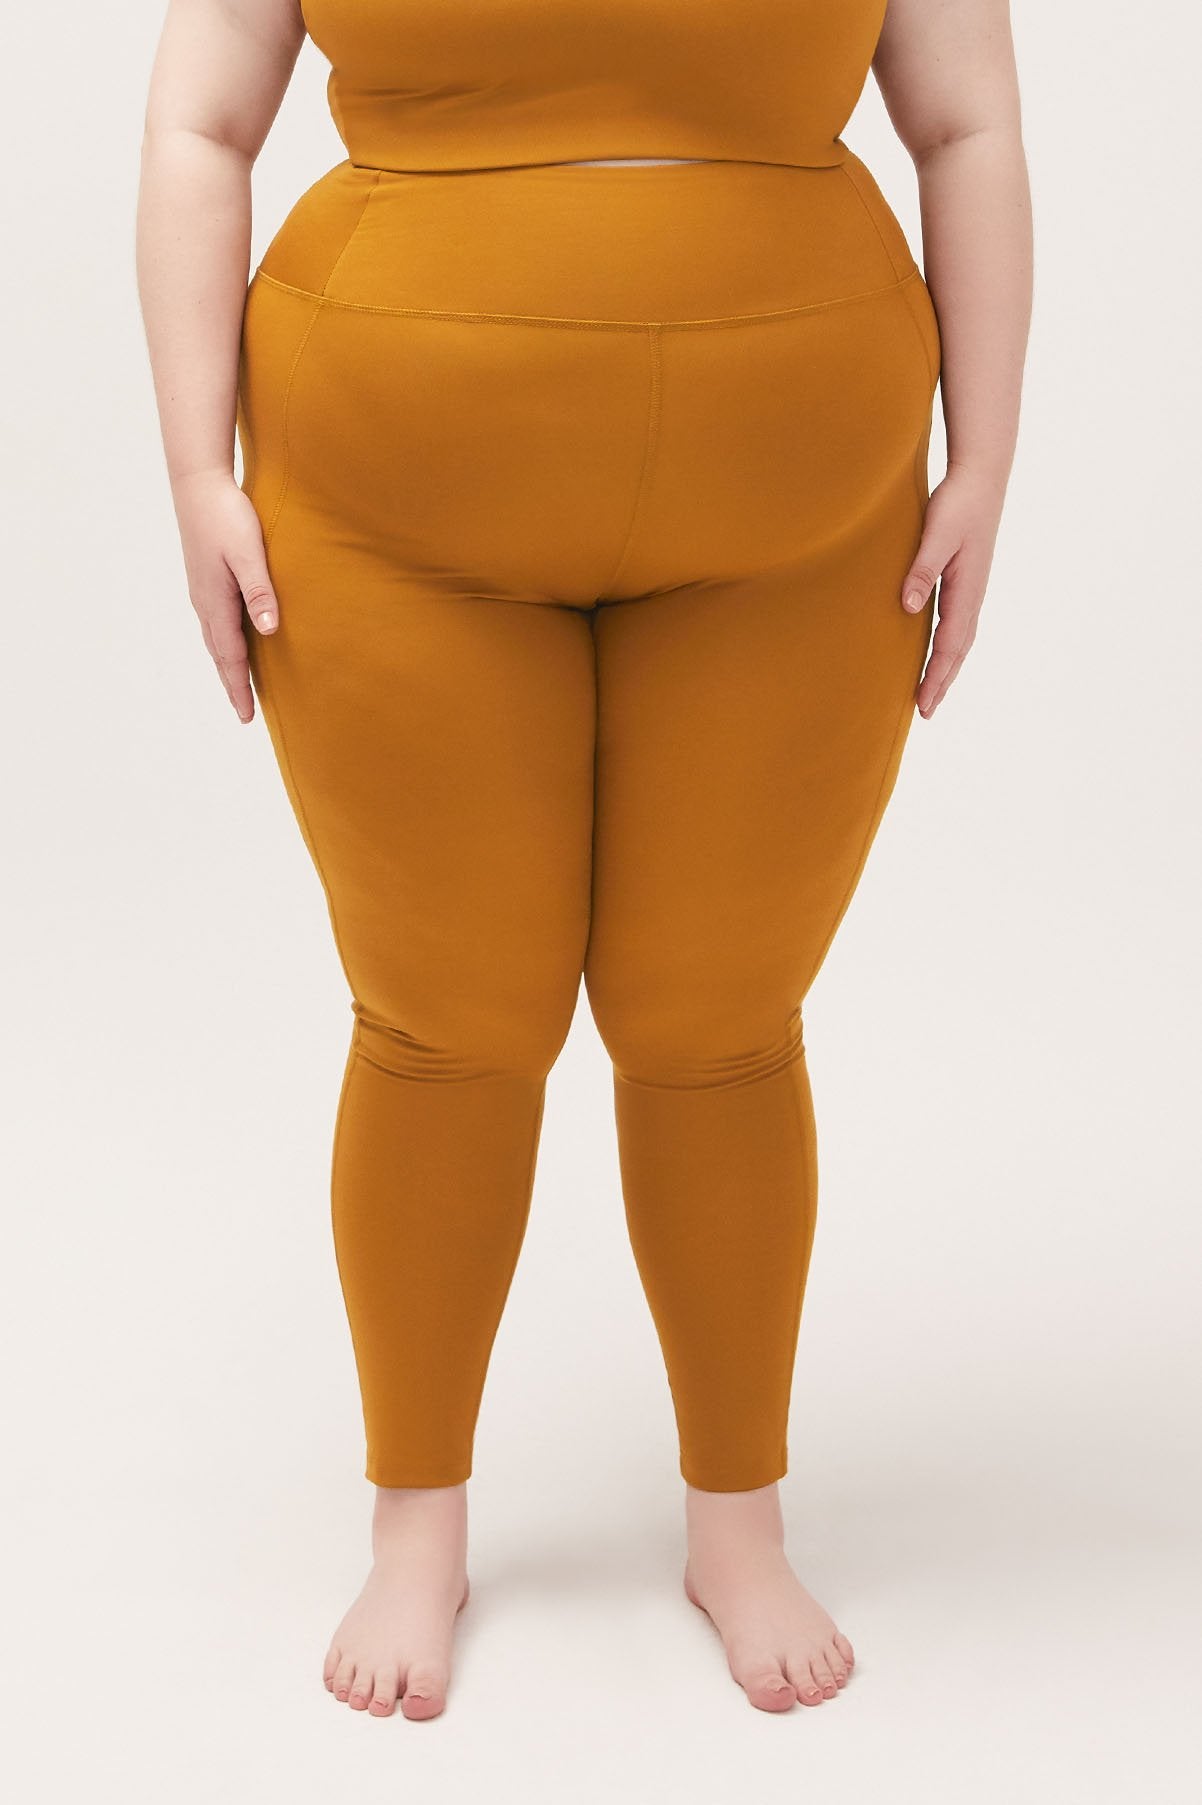 Girlfriend Collective Compressive High-Rise Legging, Girlfriend  Collective's Spring Line Is Filled With the Trendy Colours We Predicted For  2021